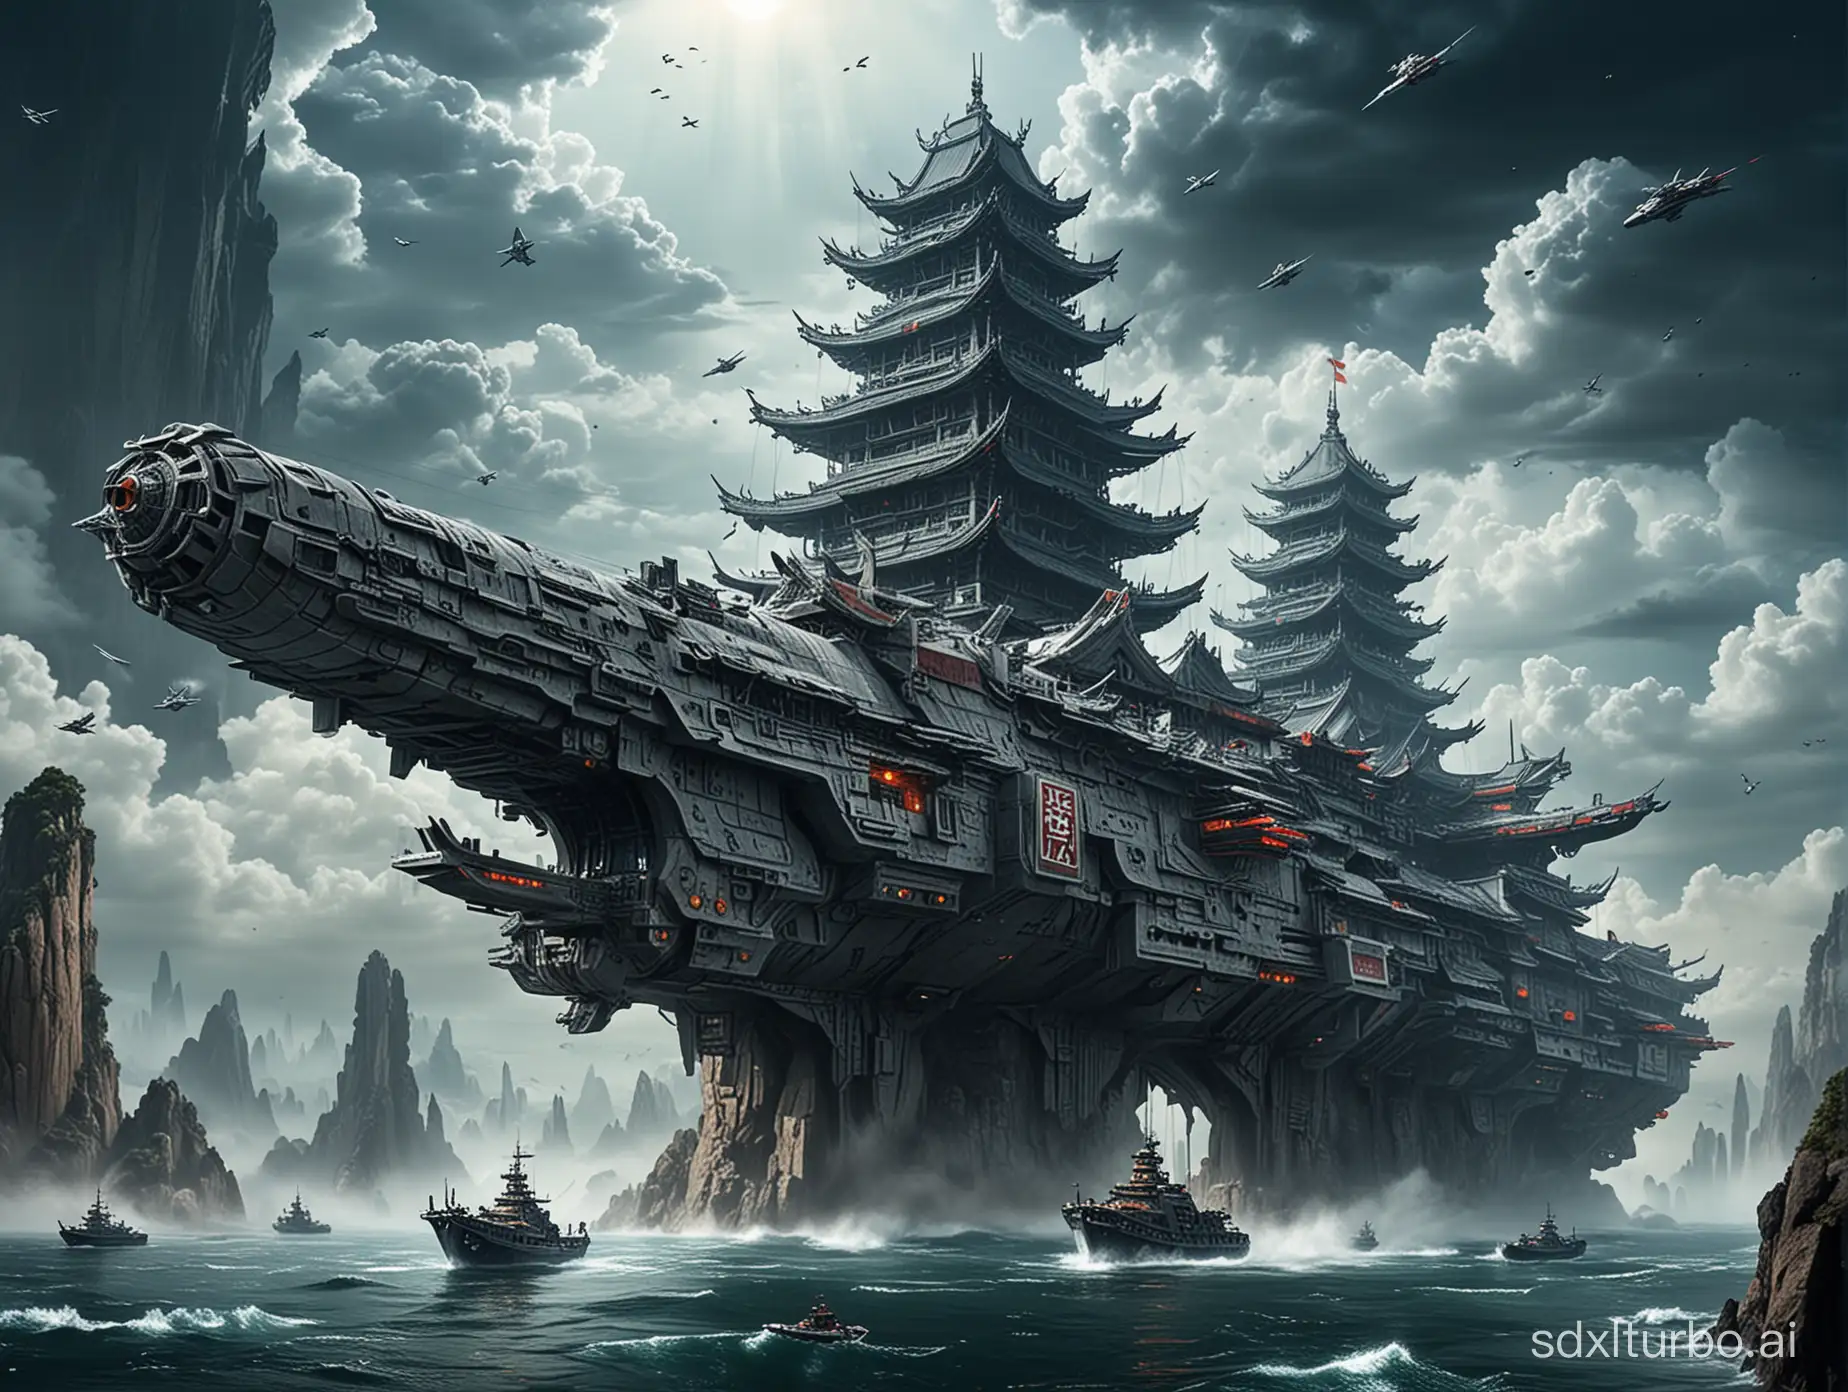 Ancient-Chinese-Buildings-on-a-SciFi-Space-Battleship-Fusion-of-Tradition-and-Futurism